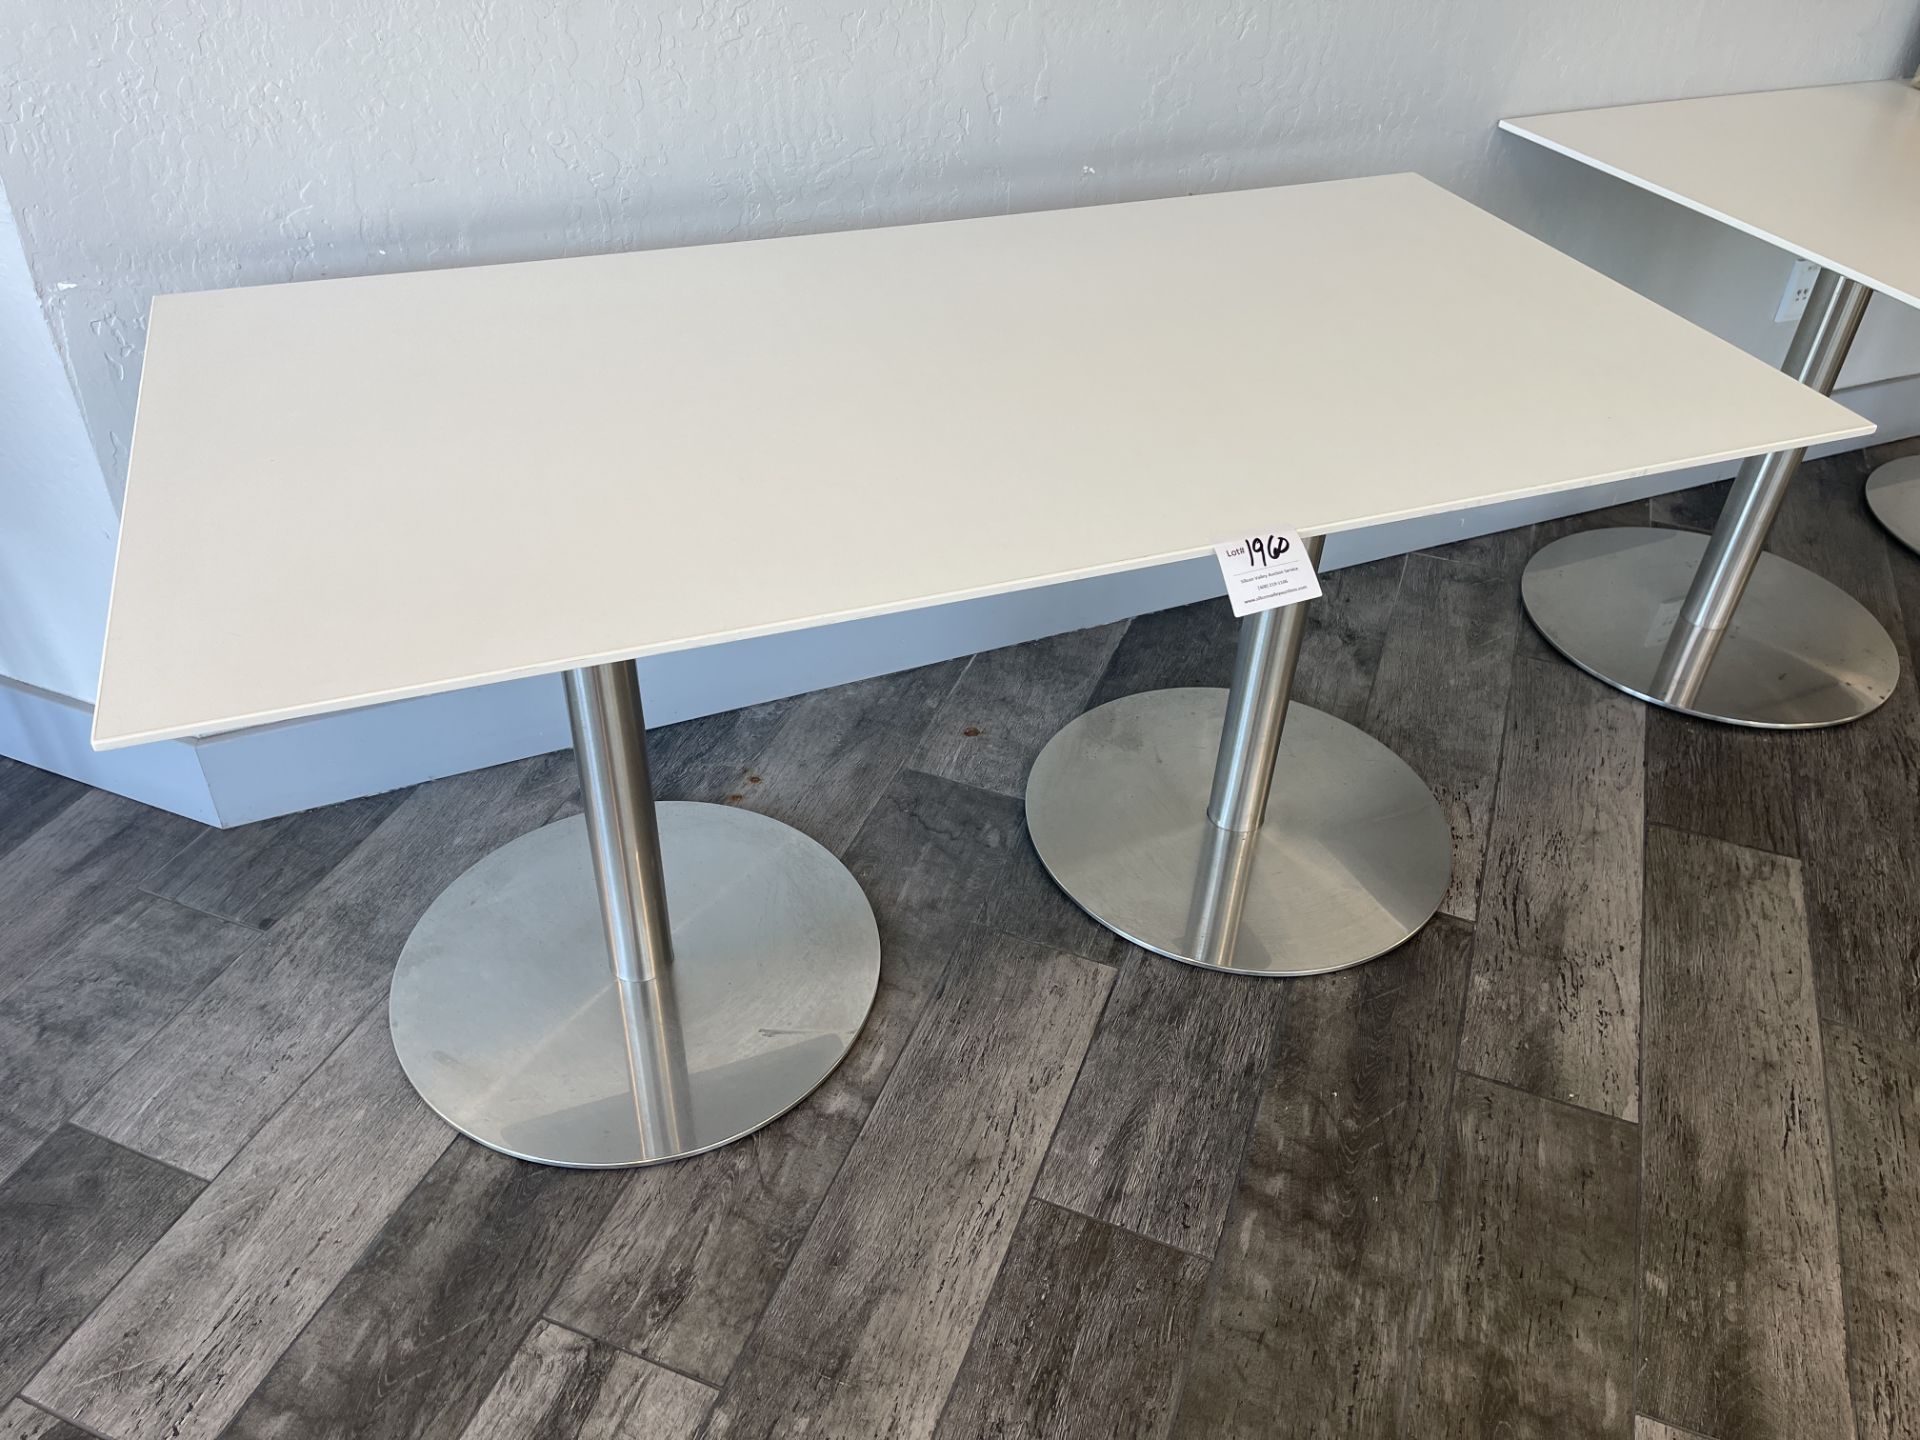 White Table with metal base 60" wide x 30" deep x 29" high and two black chairs